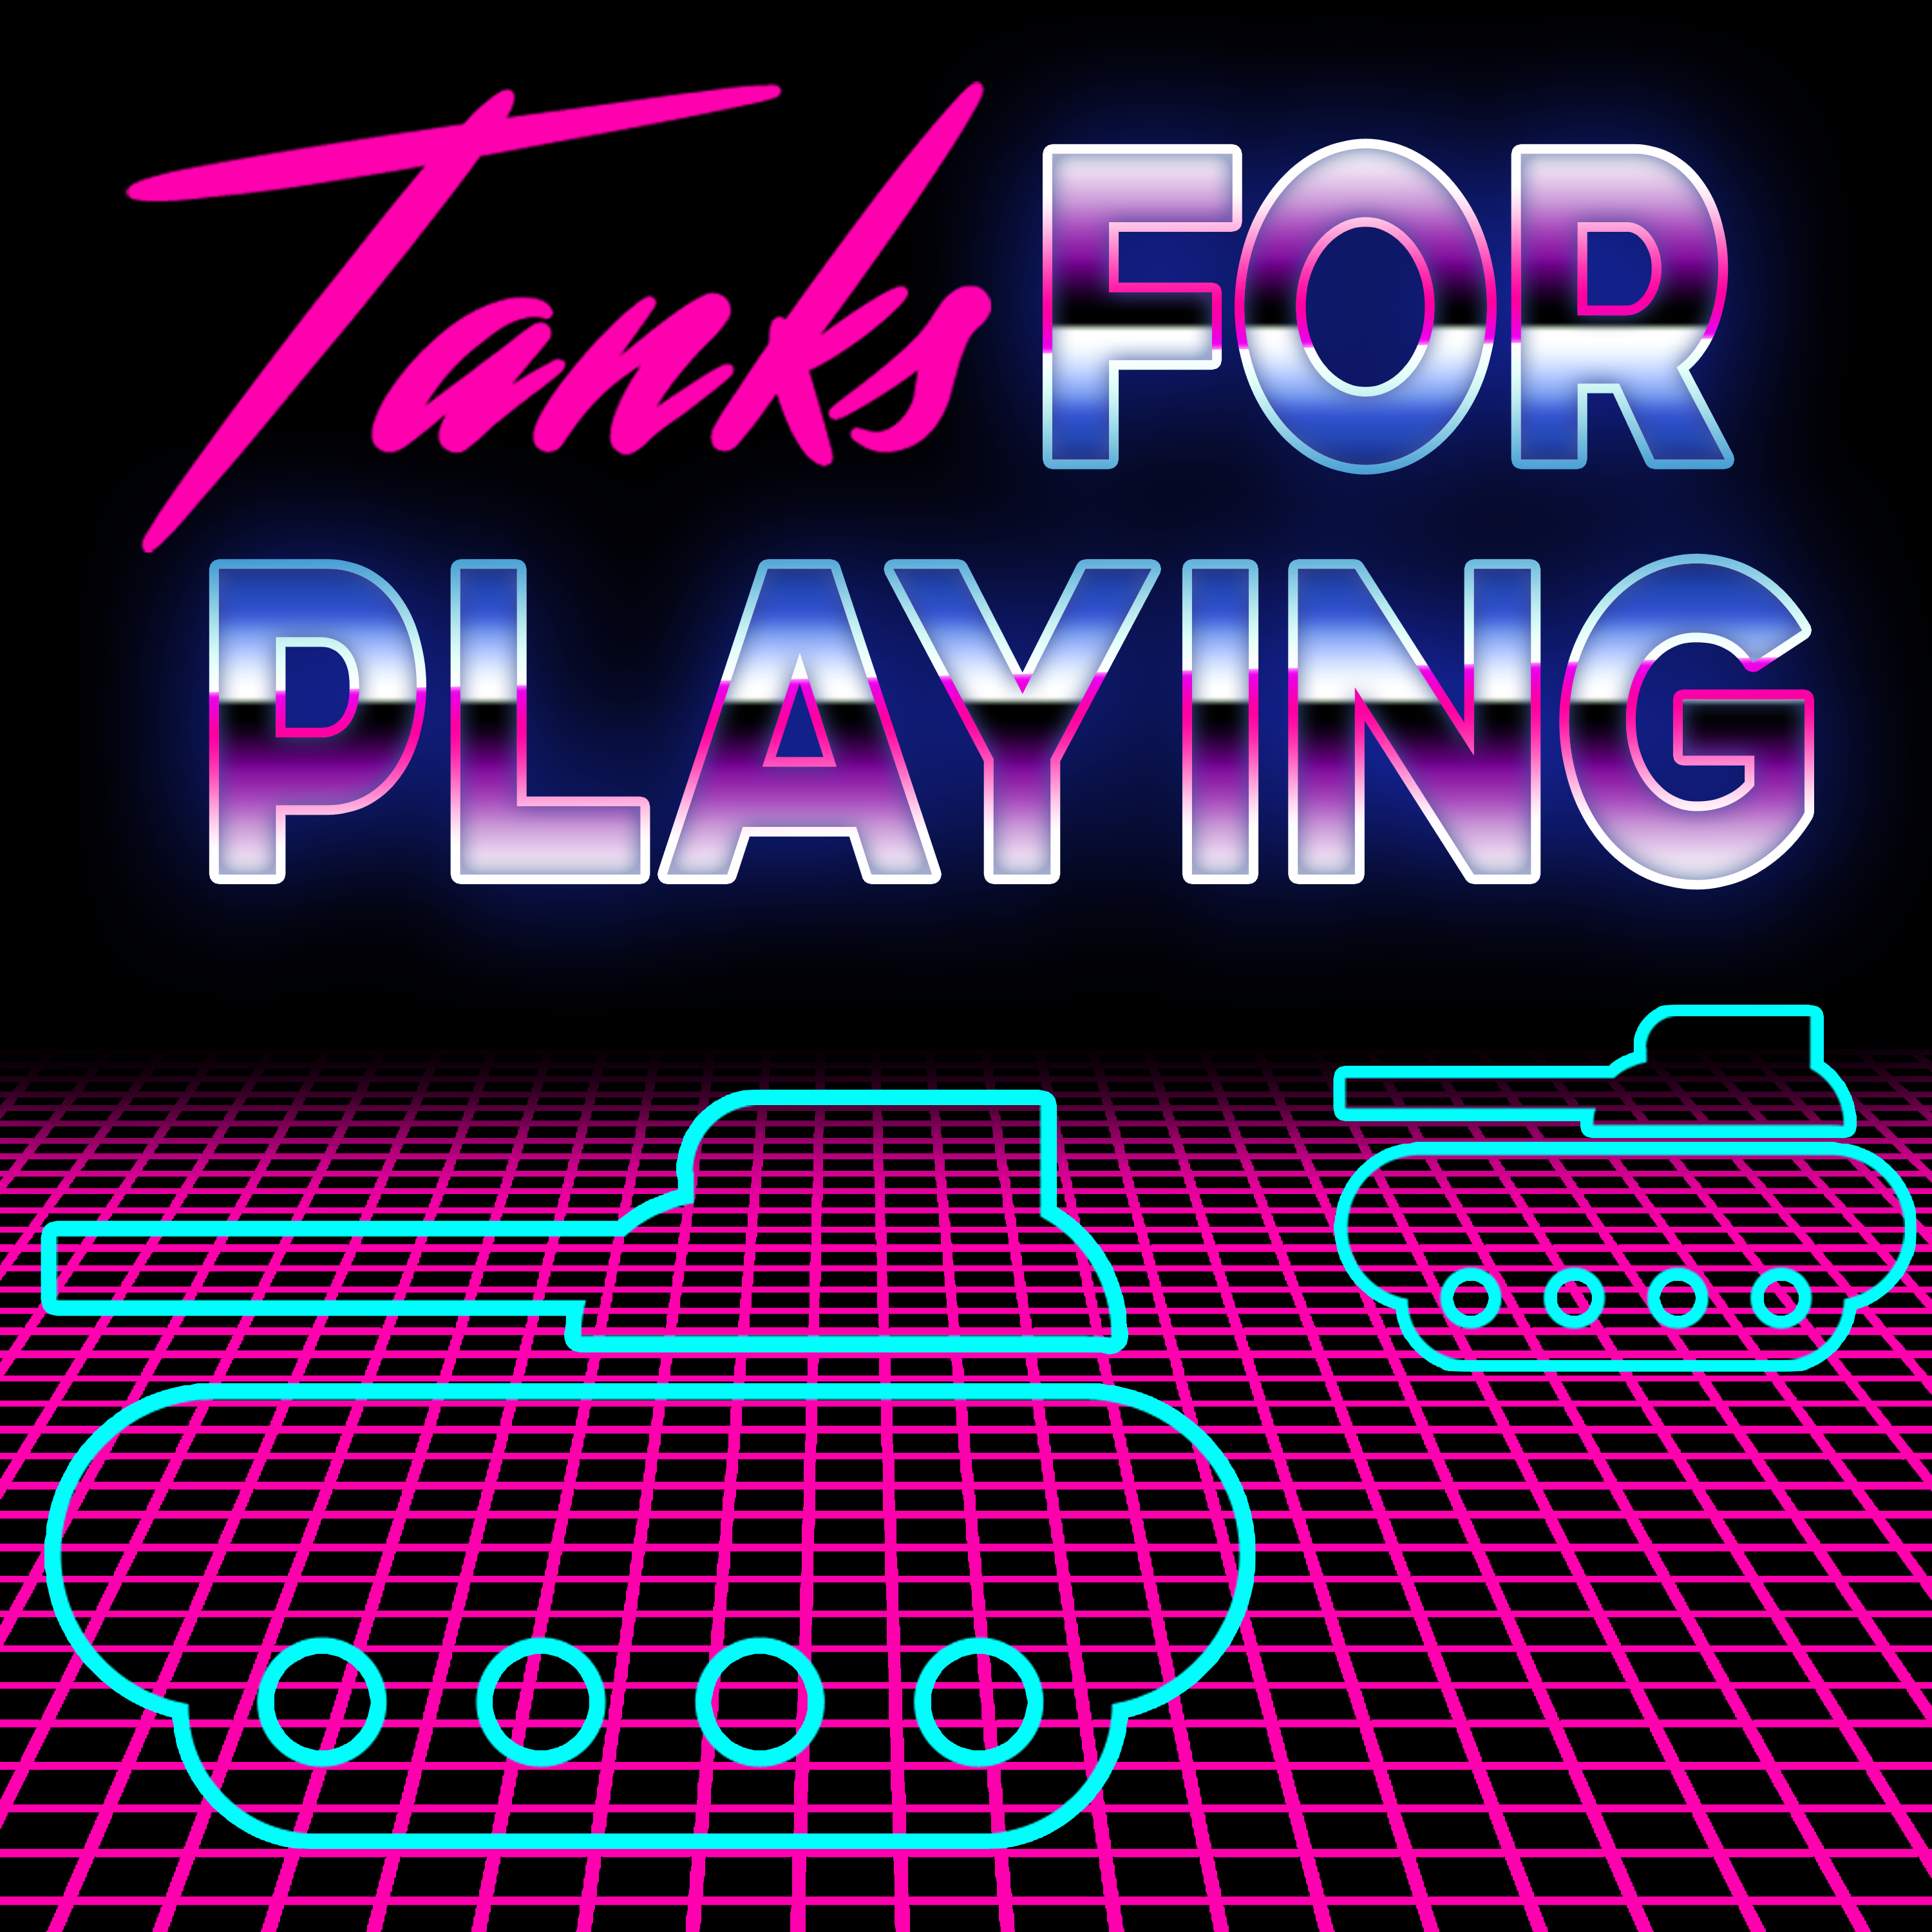 Tanks For Playing!